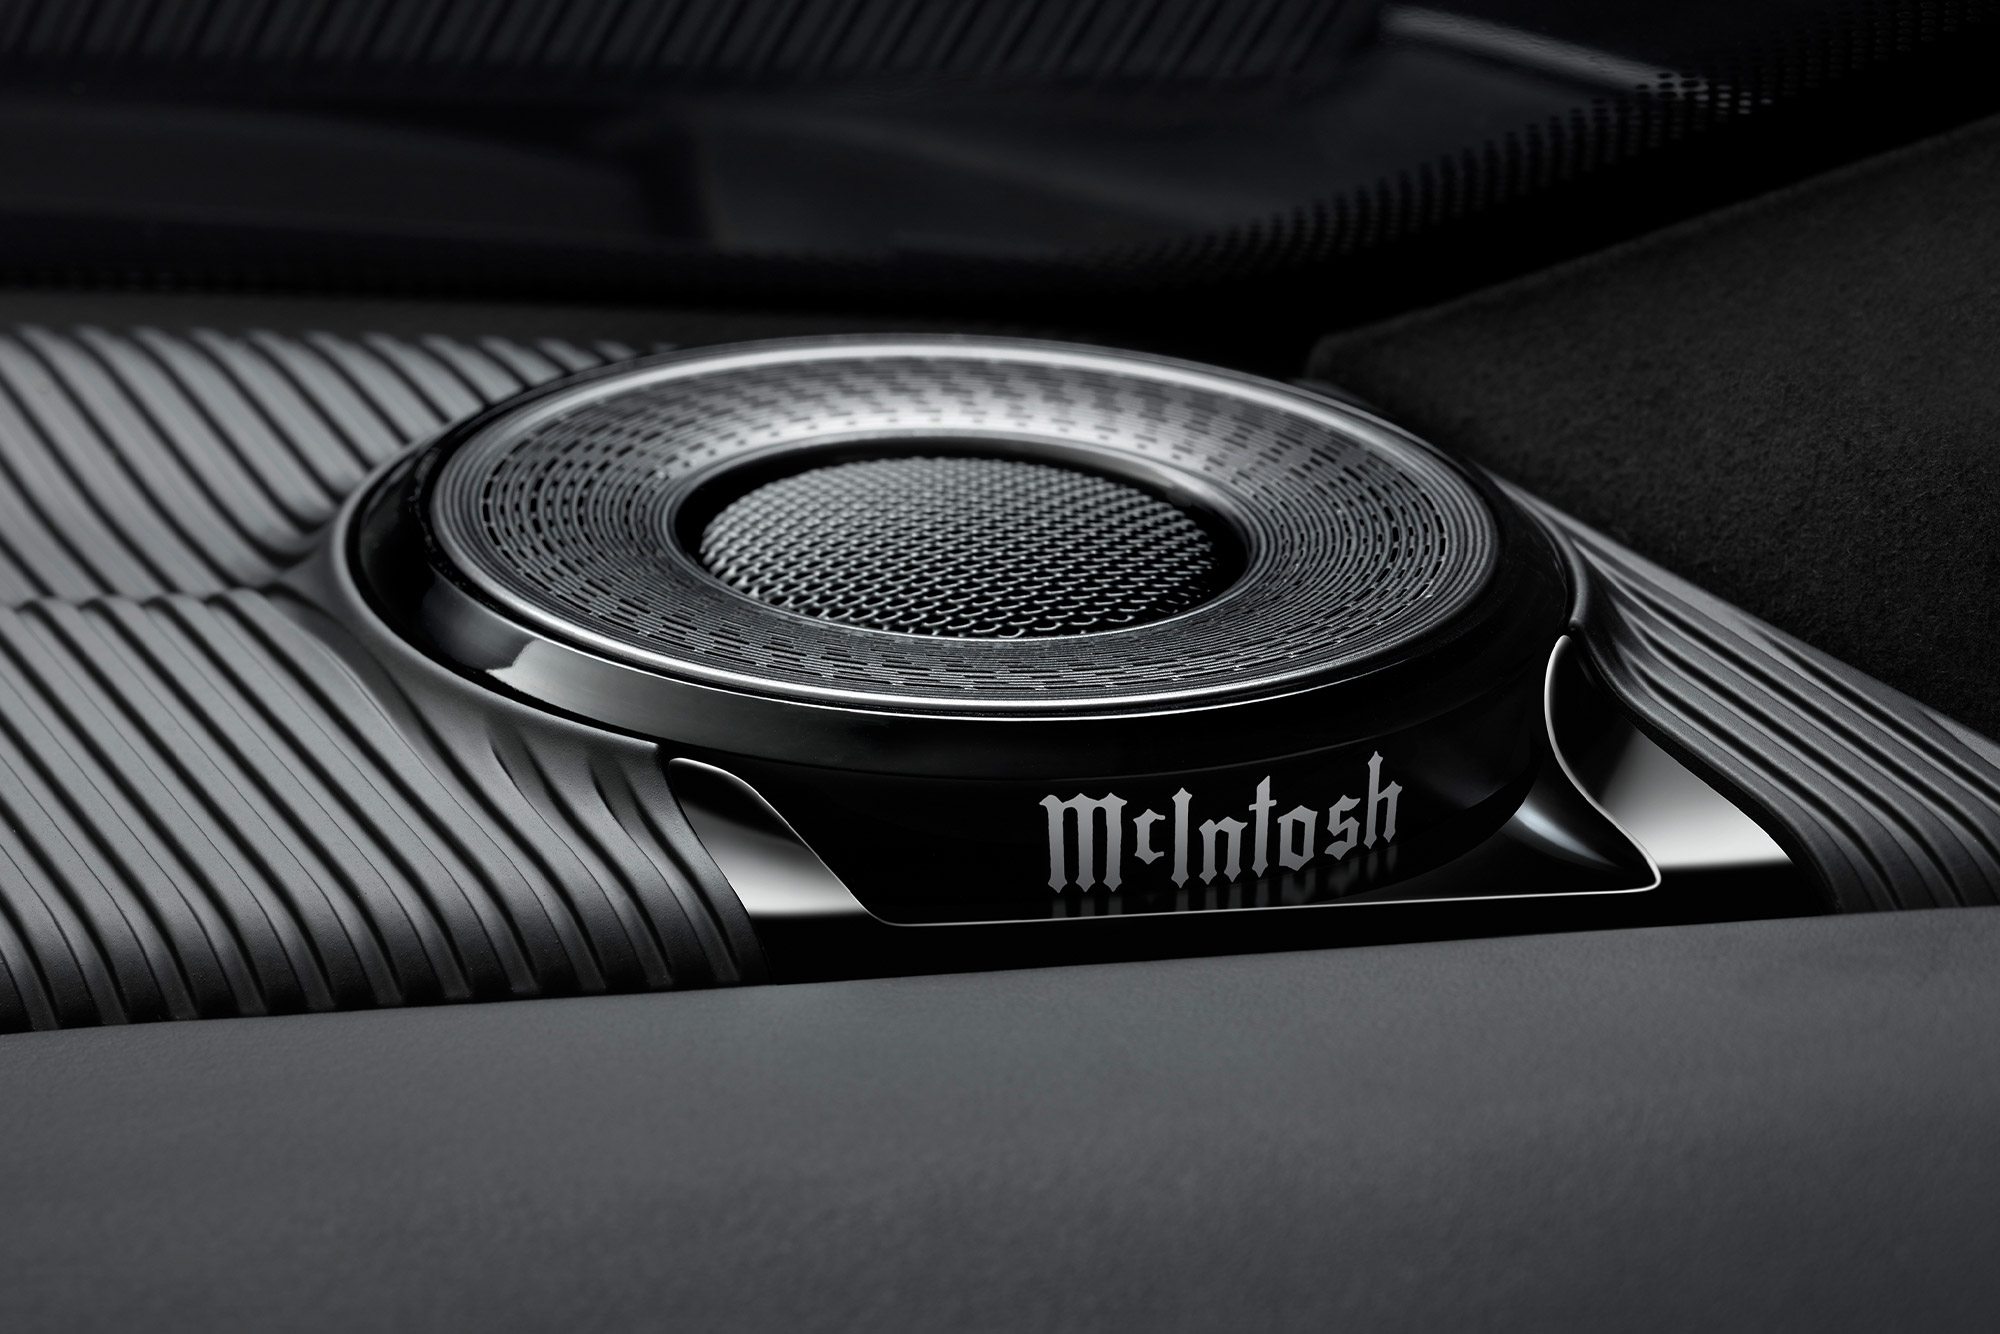 The MX1375 audio system by McIntosh available in the Grand Wagoneer